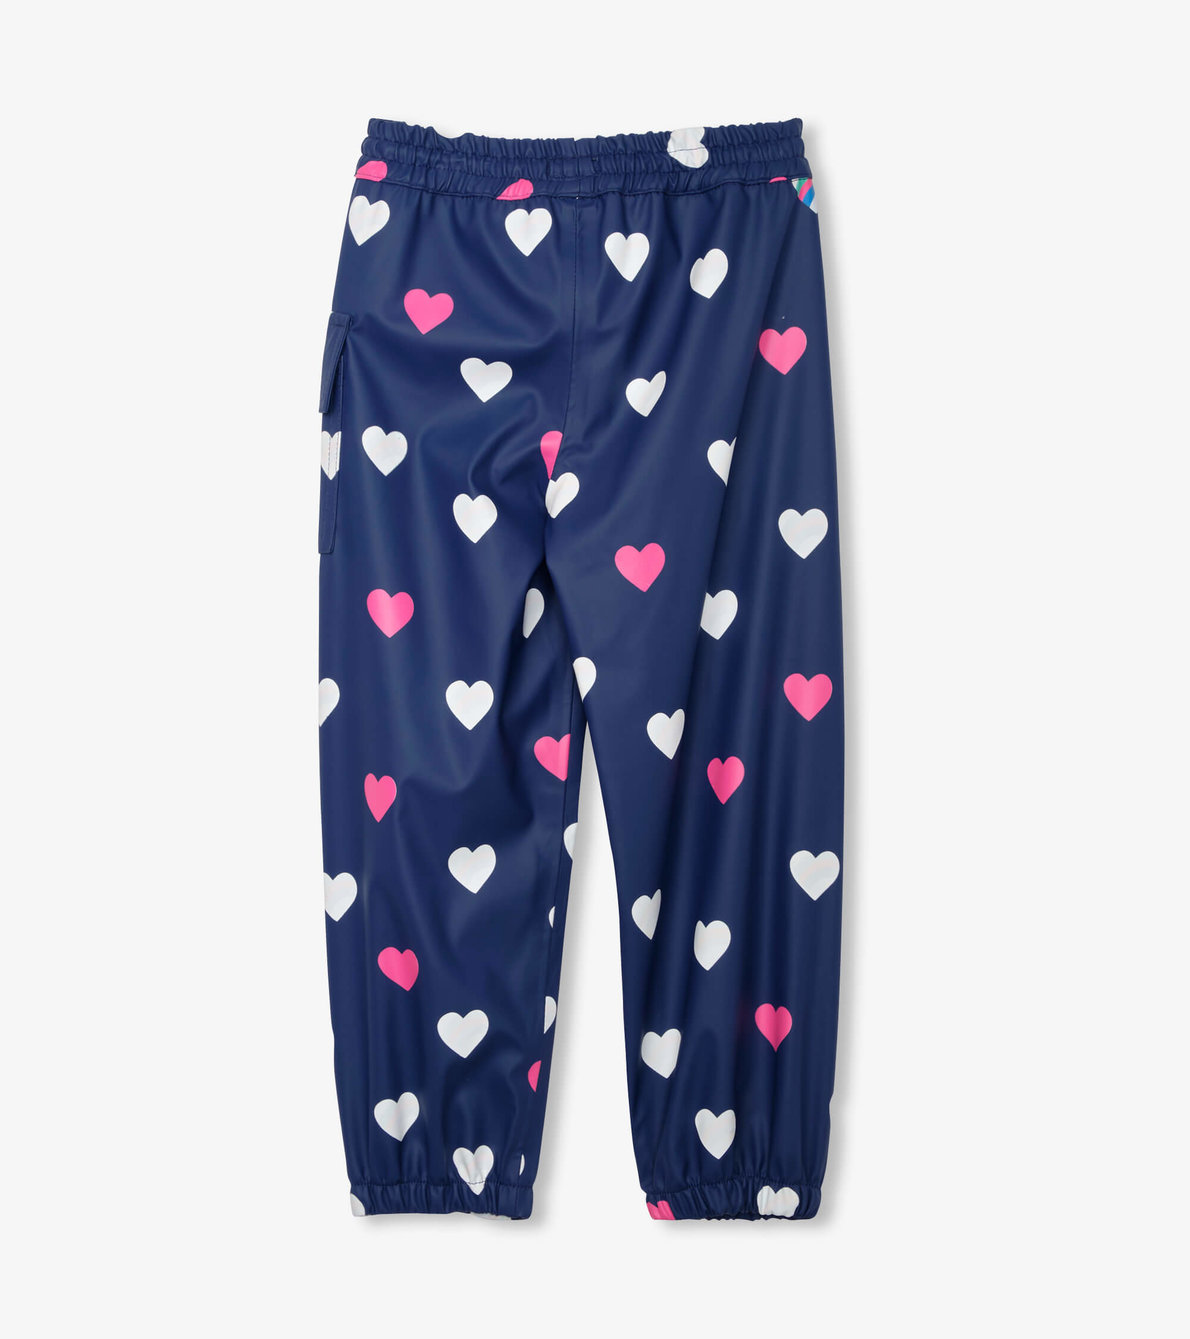 View larger image of Striped Hearts Colour Changing Splash Pants